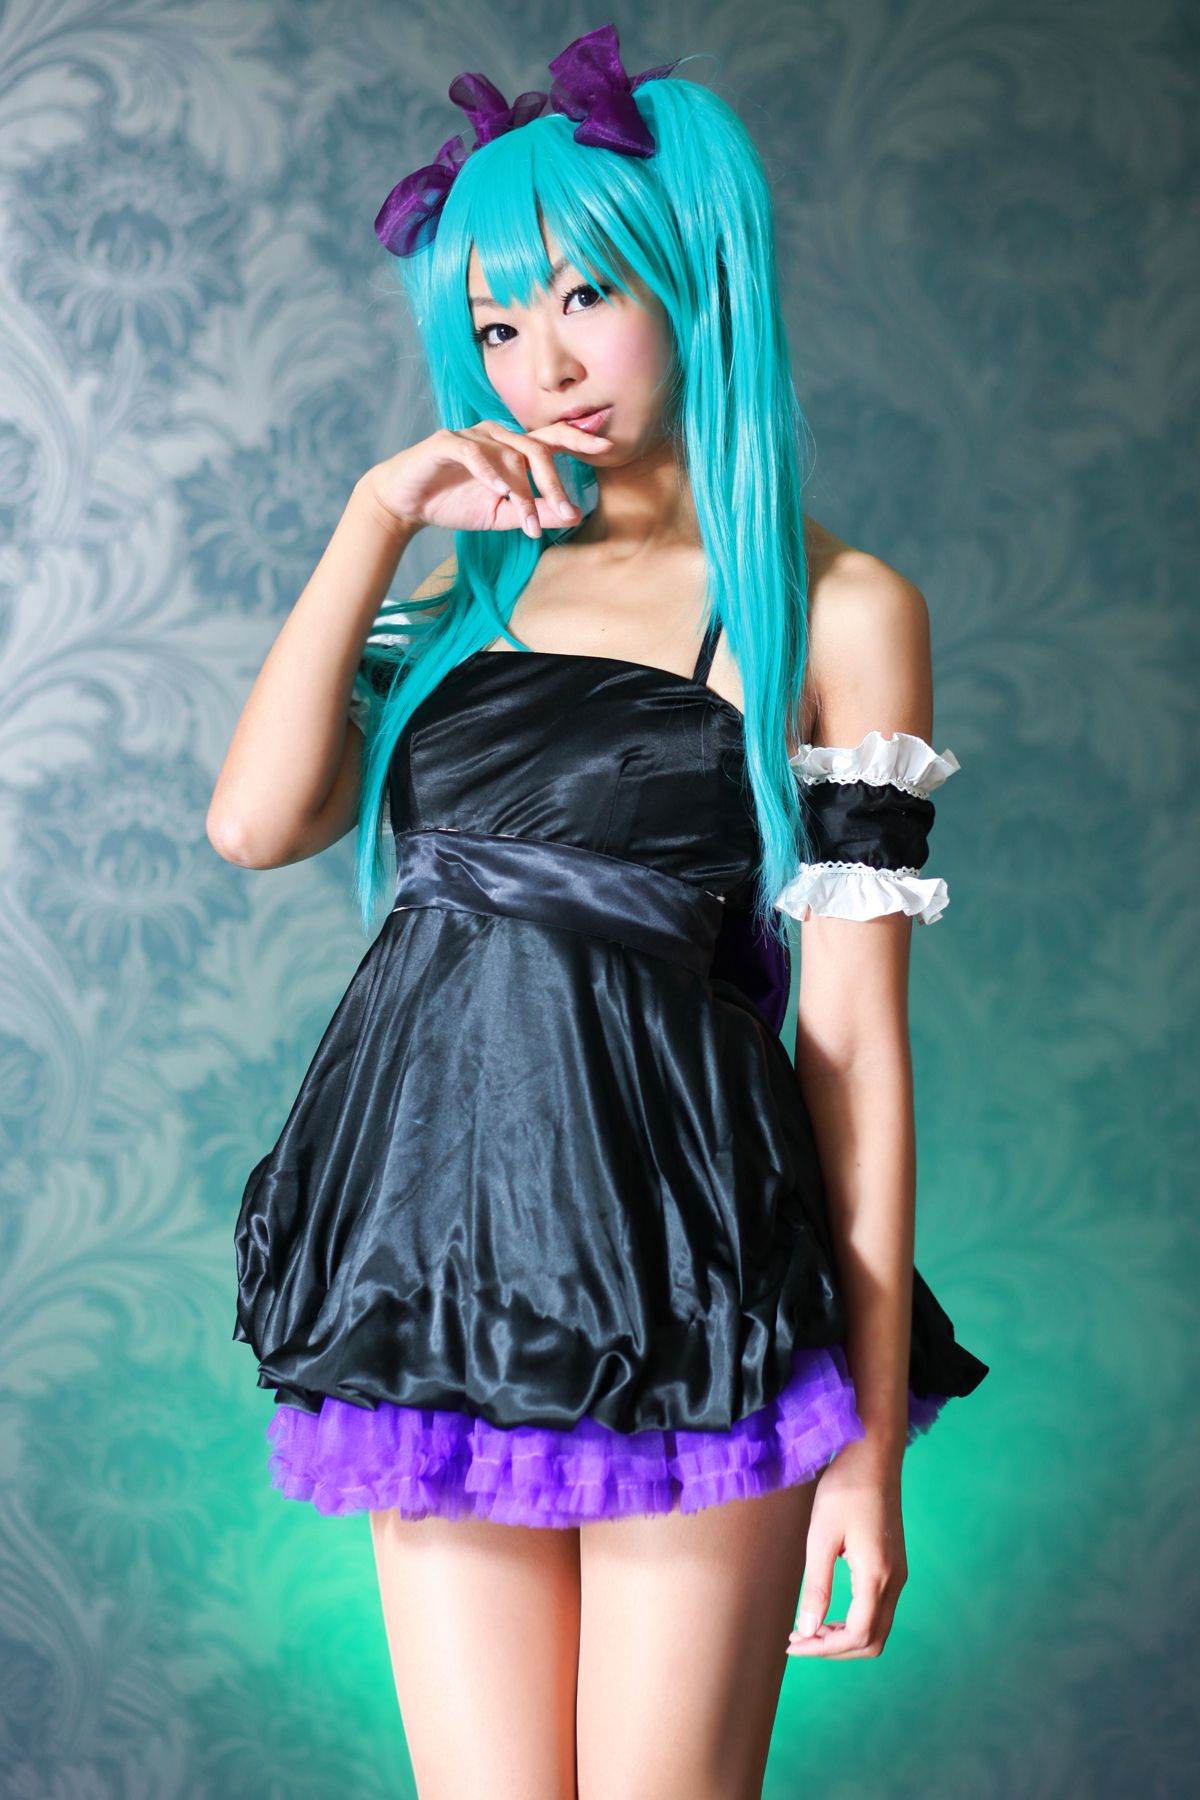 taotuhome[Cosplay] Necoco as Hatsune Miku from Vocaloid 套图第151张